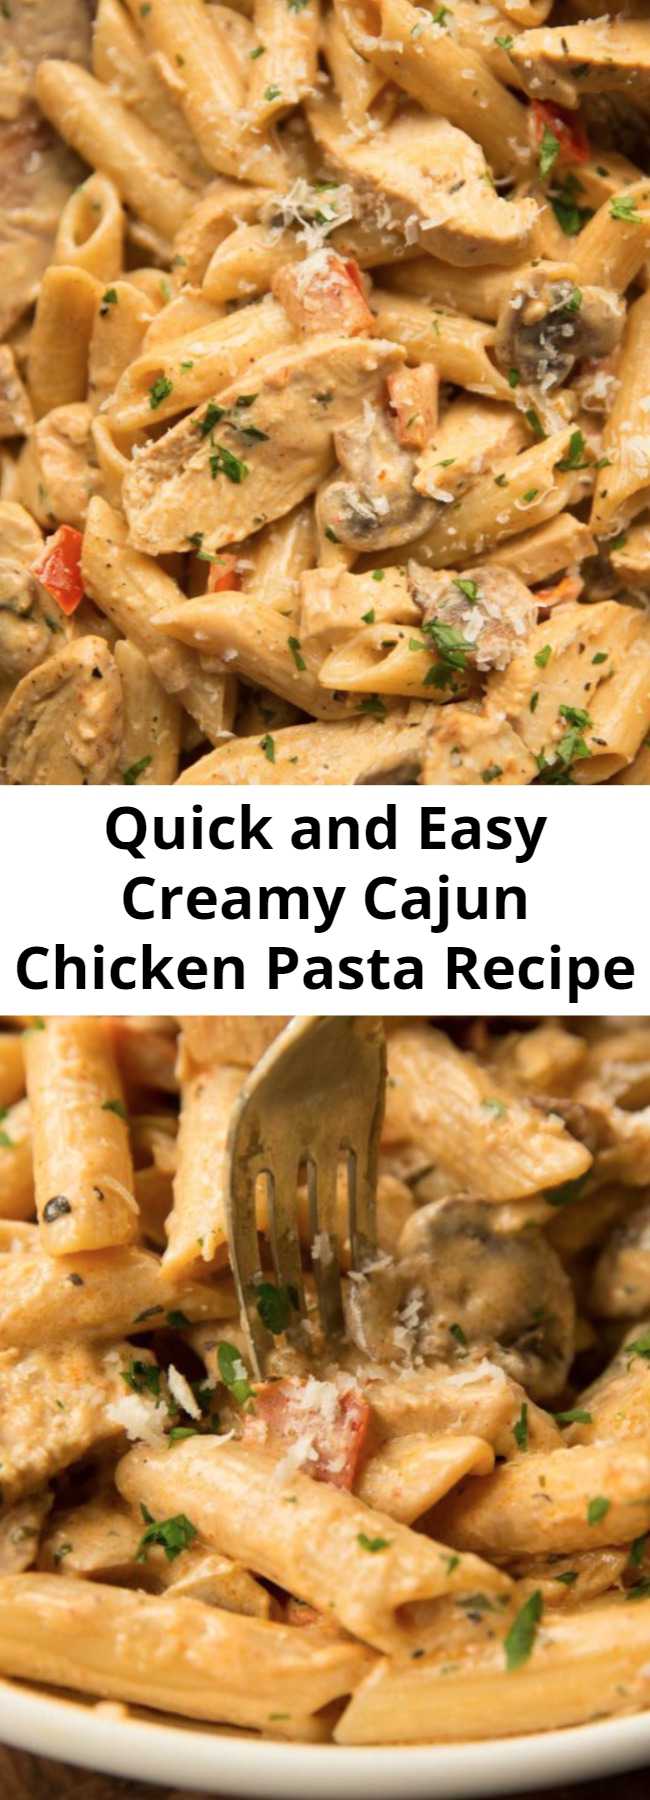 Quick and Easy Creamy Cajun Chicken Pasta Recipe - This Creamy Cajun Chicken Pasta couldn't be any more delicious if it tried! Better still, it makes the perfect quick and easy family dinner. Serves 4 big portions, 5 modest. #cajun #cajunchicken #chicken #pasta